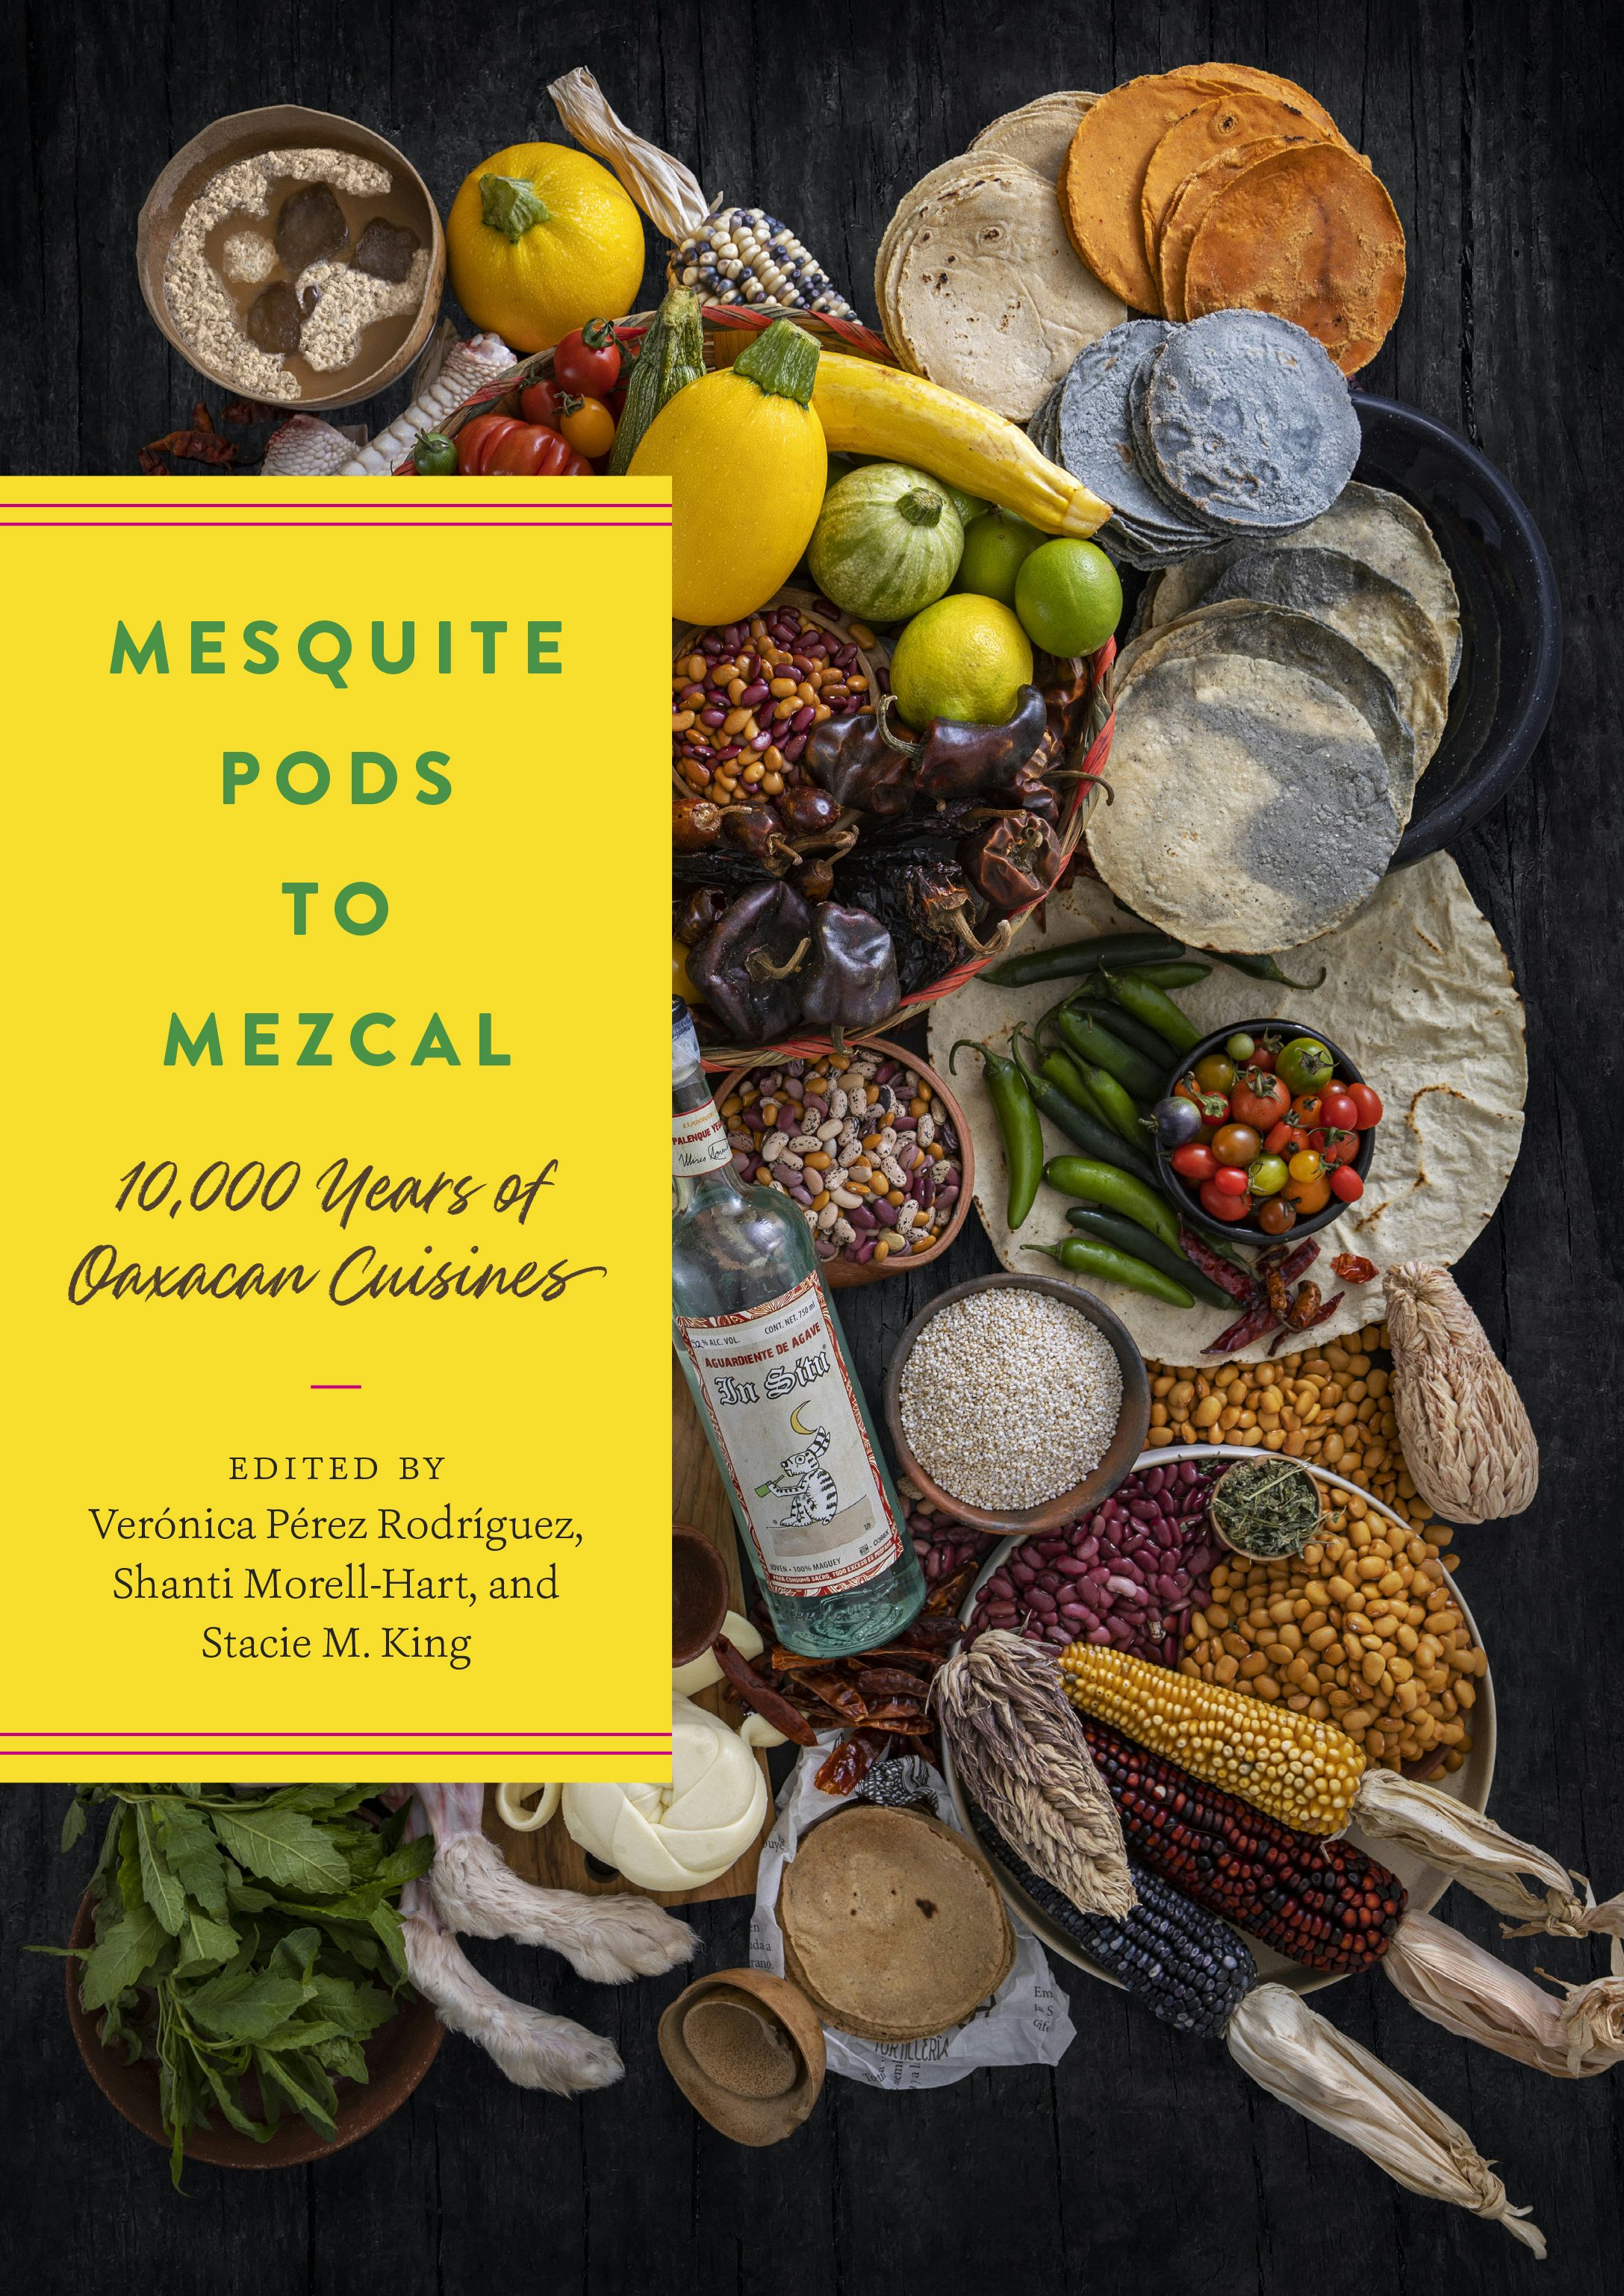 A book cover shows tortillas, maize, squashes, beans, and a bottle of mezcal on a table. The title Mesquite Pods to Mezcal: 10,000 Yeasr of Oaxacan Cuisines appears in a yellow banner to the left.